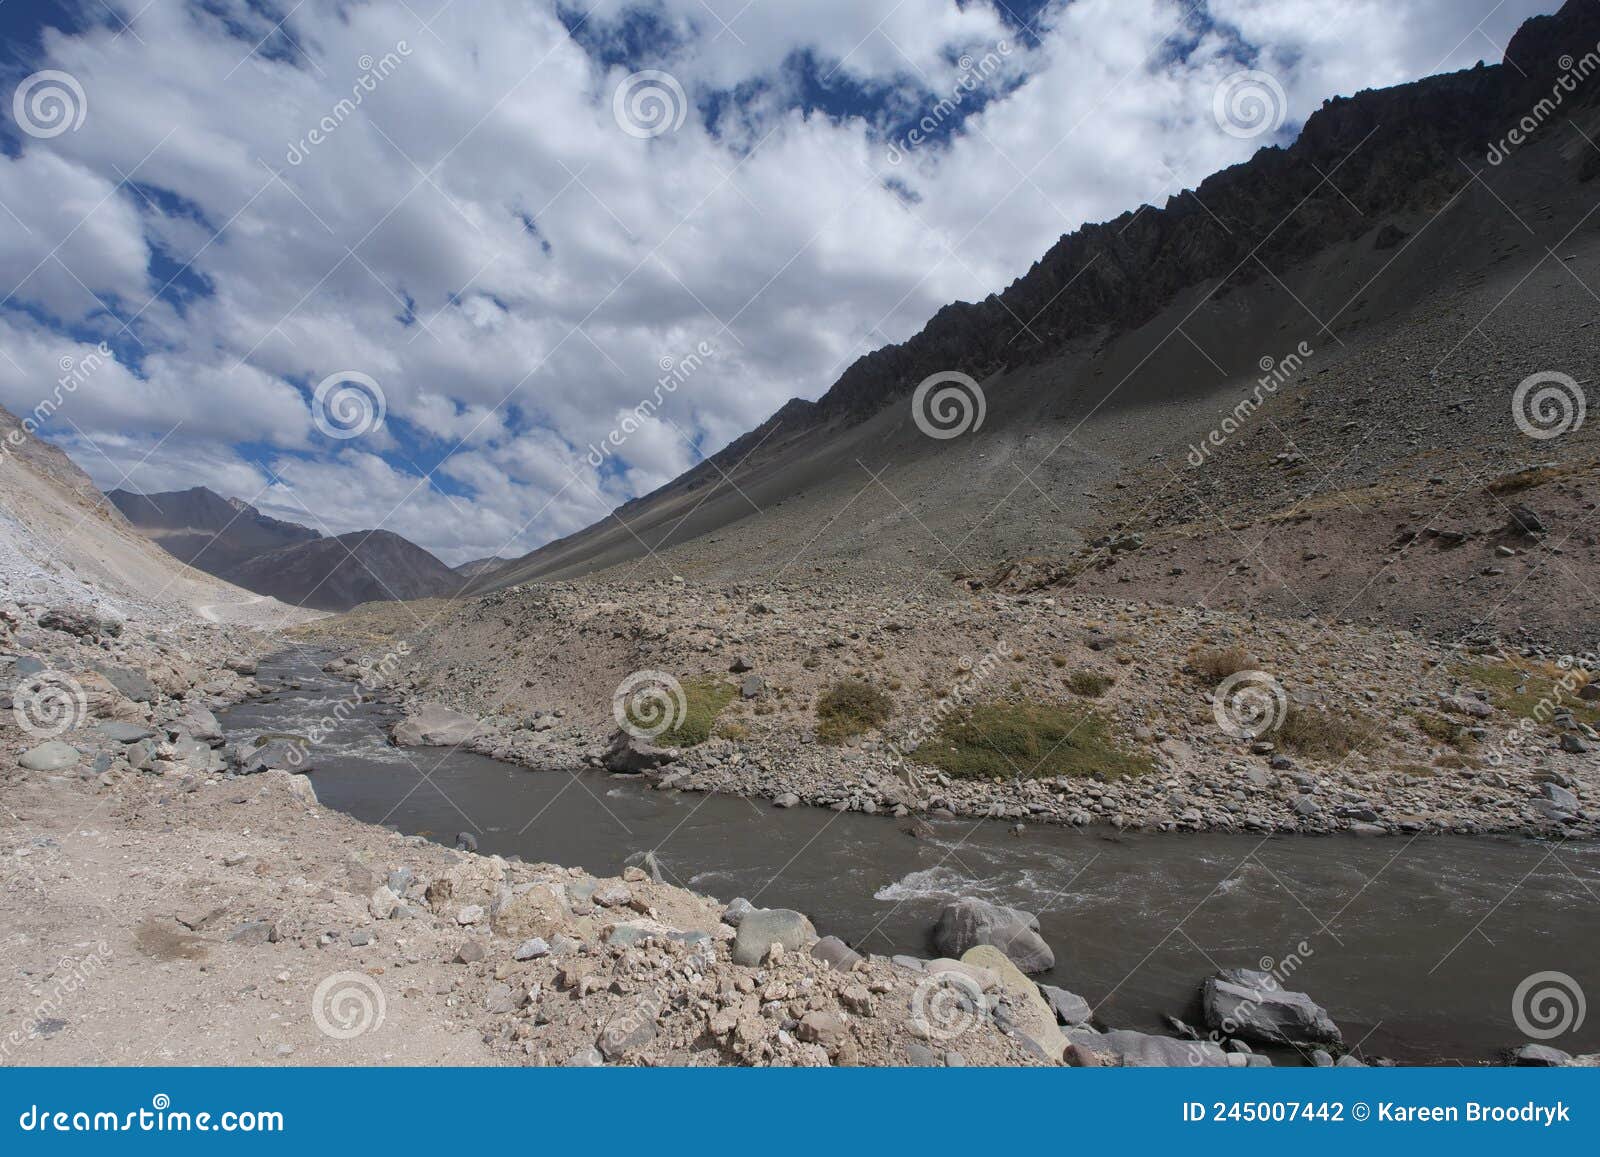 brown river running through the valle de colina, andes mountain range, chile, south america